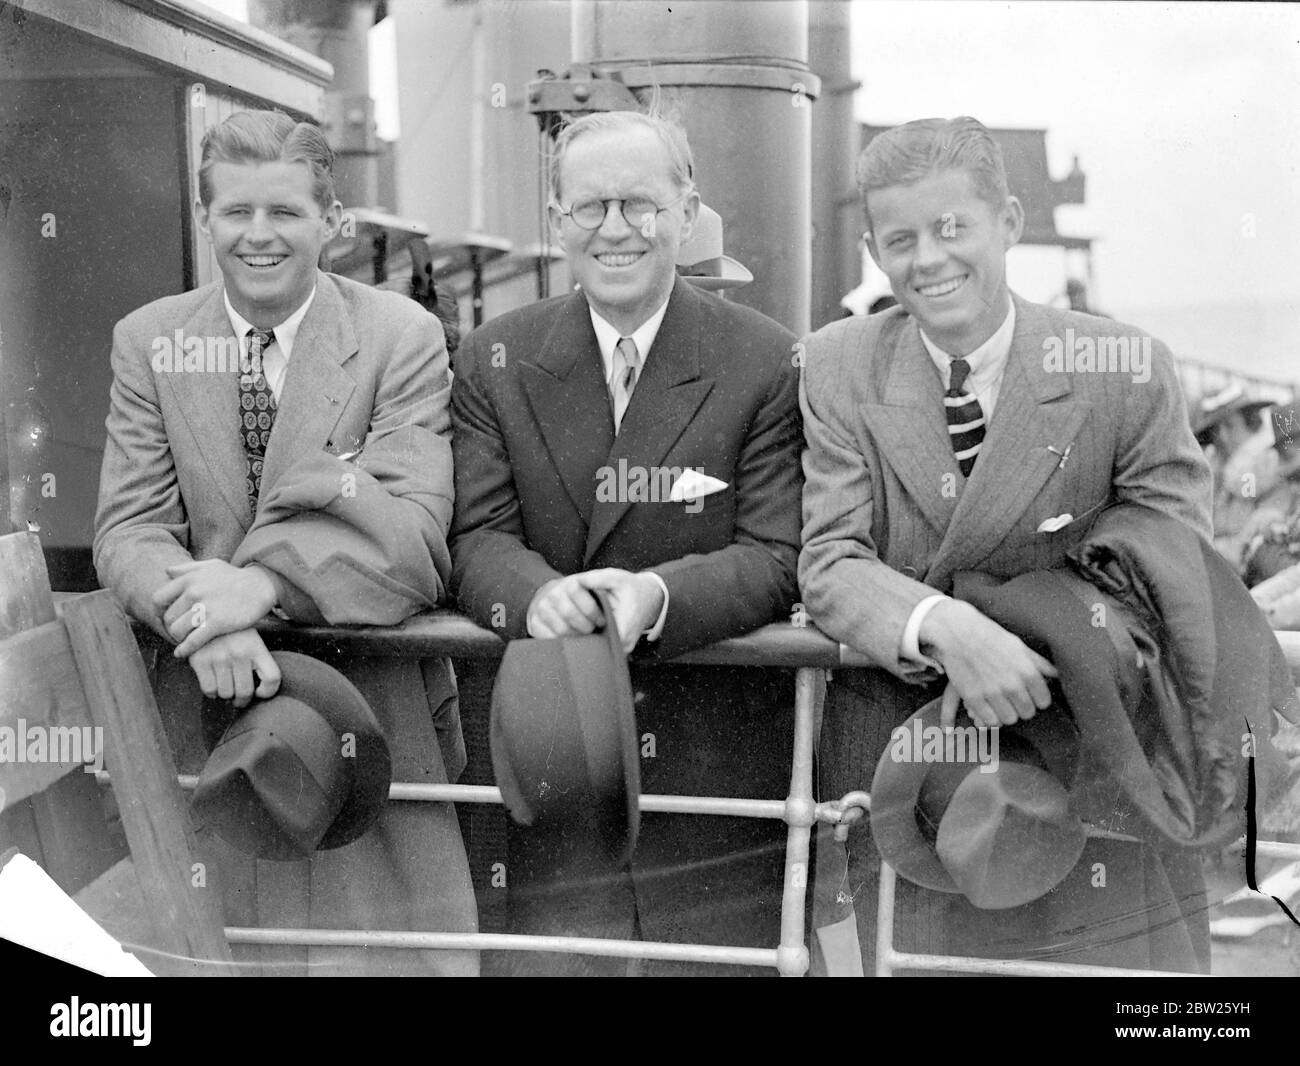 US Ambassador arrives back in England with two grown sons. Mr Joseph P Kennedy, the American Ambassador to London, arrived at Southampton on the 'Normandie' after his visit to the United States. He was accompanied by his two grown sons, Joseph, Jr who recently graduated at Harvard and John. Photo shows, Mr Joseph Kennedy with his two sons, Joseph Kennedy Jr (left) and John kennedy (right) on arrival at Southampton. 4 July 1938 Stock Photo